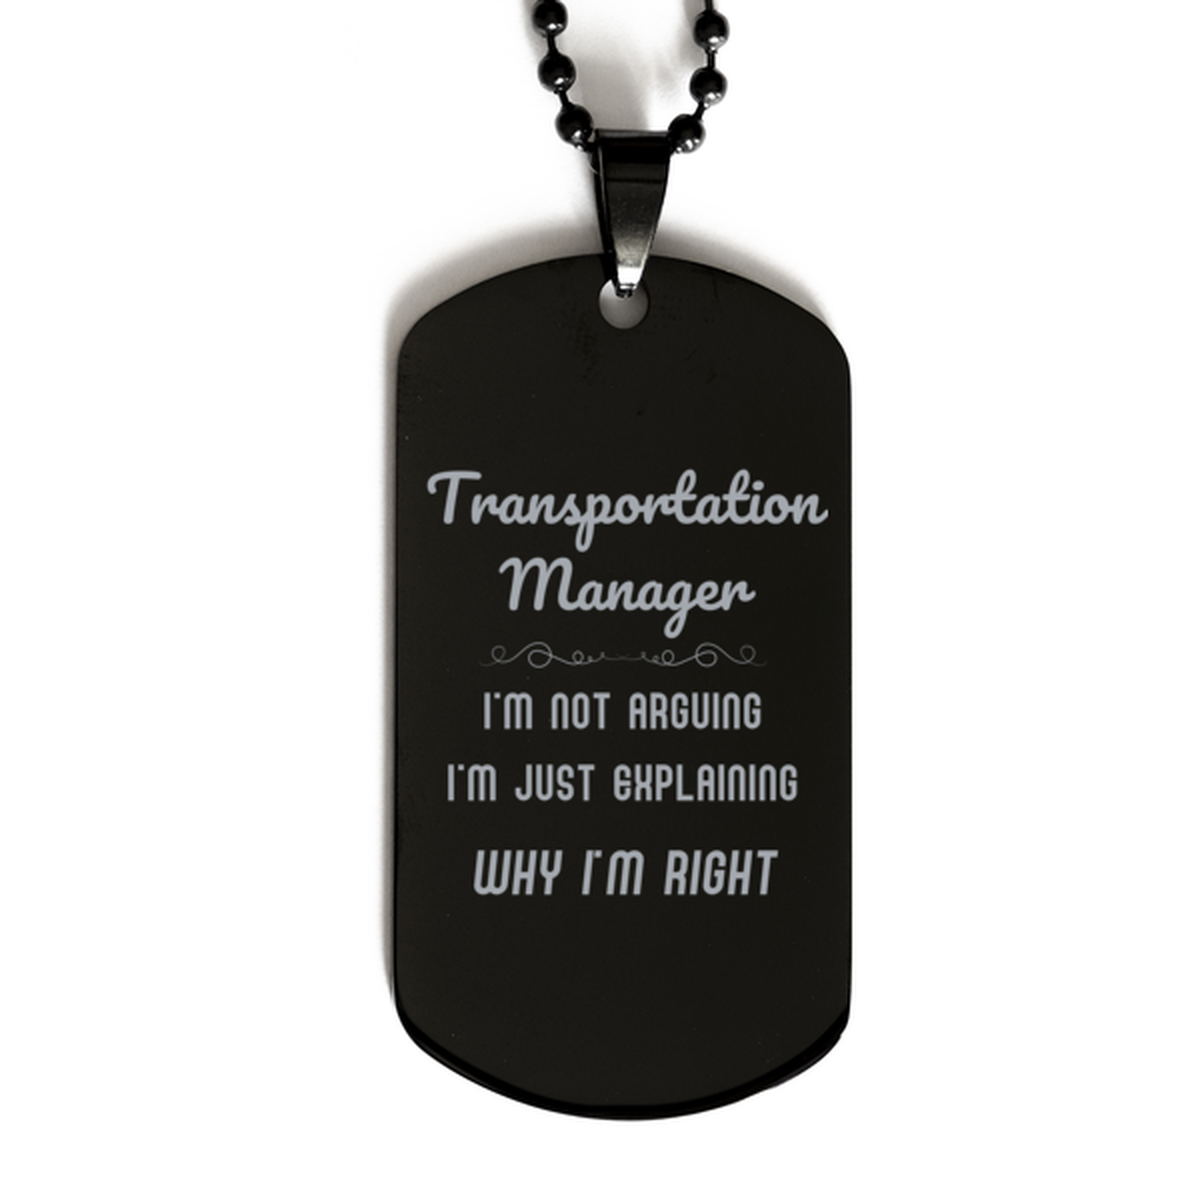 Transportation Manager I'm not Arguing. I'm Just Explaining Why I'm RIGHT Black Dog Tag, Funny Saying Quote Transportation Manager Gifts For Transportation Manager Graduation Birthday Christmas Gifts for Men Women Coworker